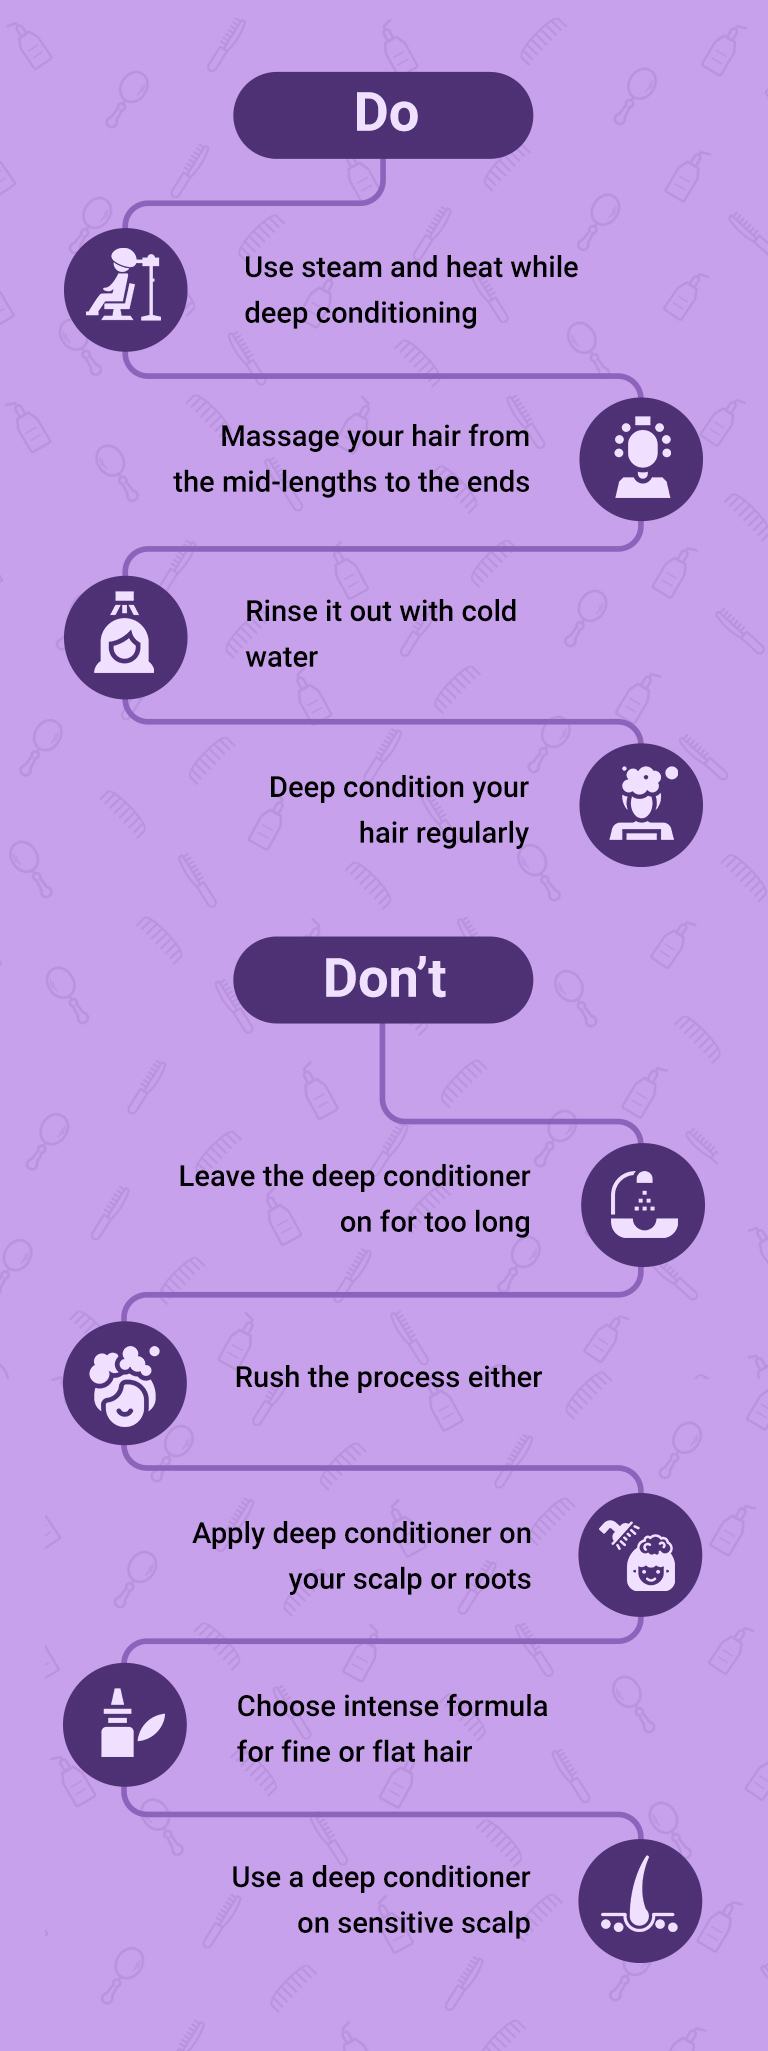 DOs And DON’Ts Of Deep Conditioning